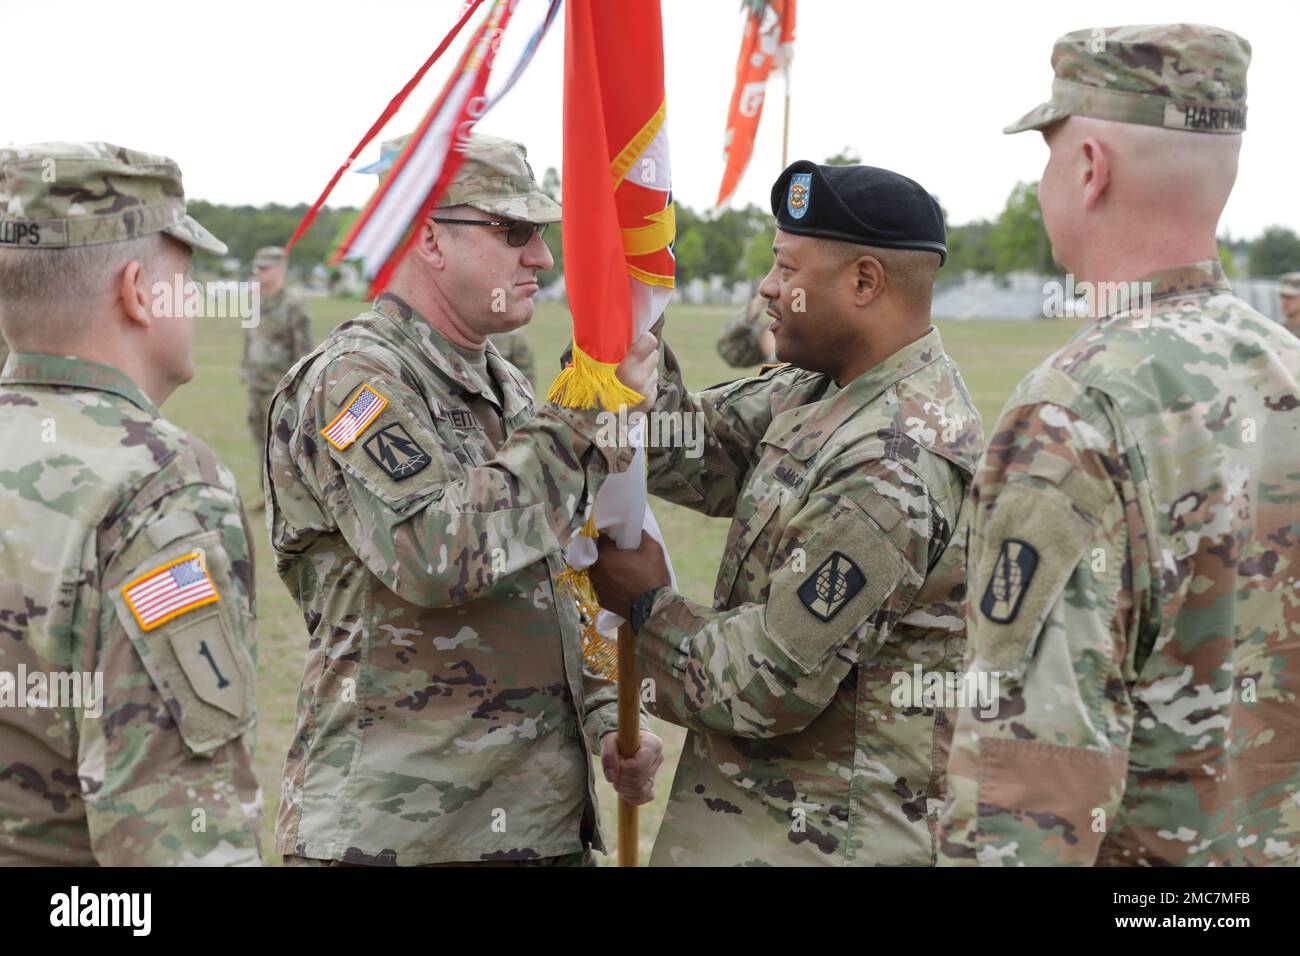 U.S. Army Tracy G. Monteith, in coming commander of the 359th Theater Tactical Signal Brigade, passes the 359th TTSB guidon back to Command Sgt. Maj. Sheldon Gray to complete the passage of command during the change of command ceremony at Barton Field on Fort Gordon in Augusta, Ga on June 26, 2022. Col. Travis A. Hartman relinquished command of the 359th TTSB to Col. Tracy G. Monteith, ceremony was presided over by Major. Gen. John H. Phillips,  commanding general, 335th Signal Command Theater. Stock Photo